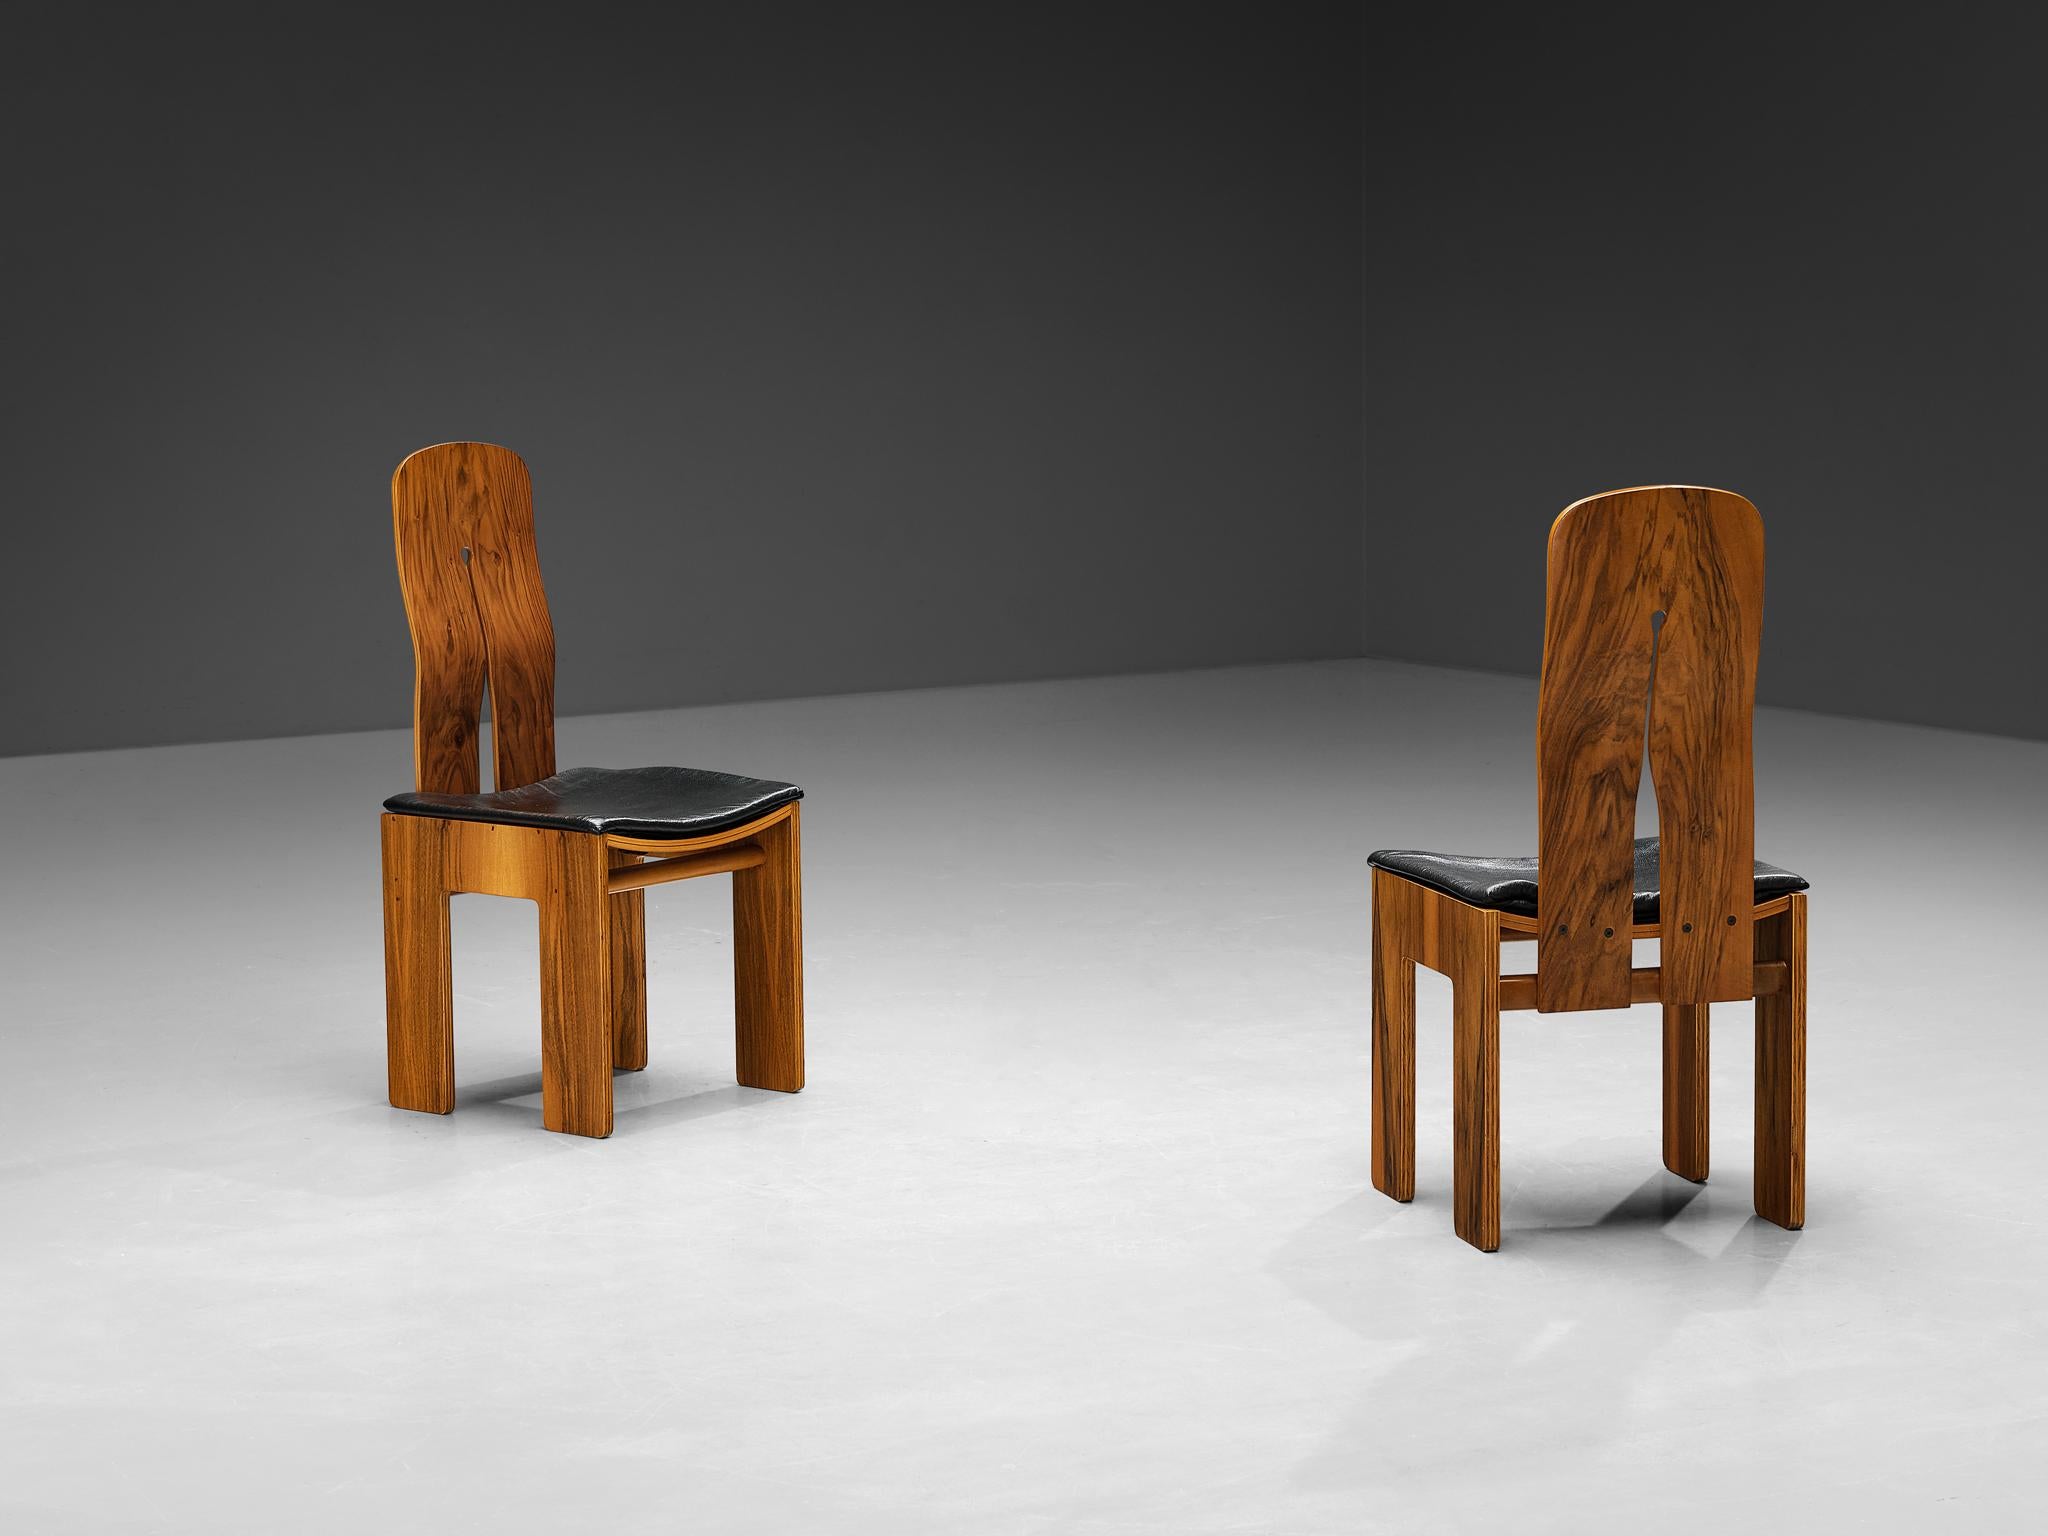 Carlo Scarpa for Bernini, pair of dining chairs model '765', walnut, black leather, design 1934, production 1970s

These well-proportioned chairs are designed by Carlo Scarpa in 1934, a design that was not produced until 1977. He exclusively created